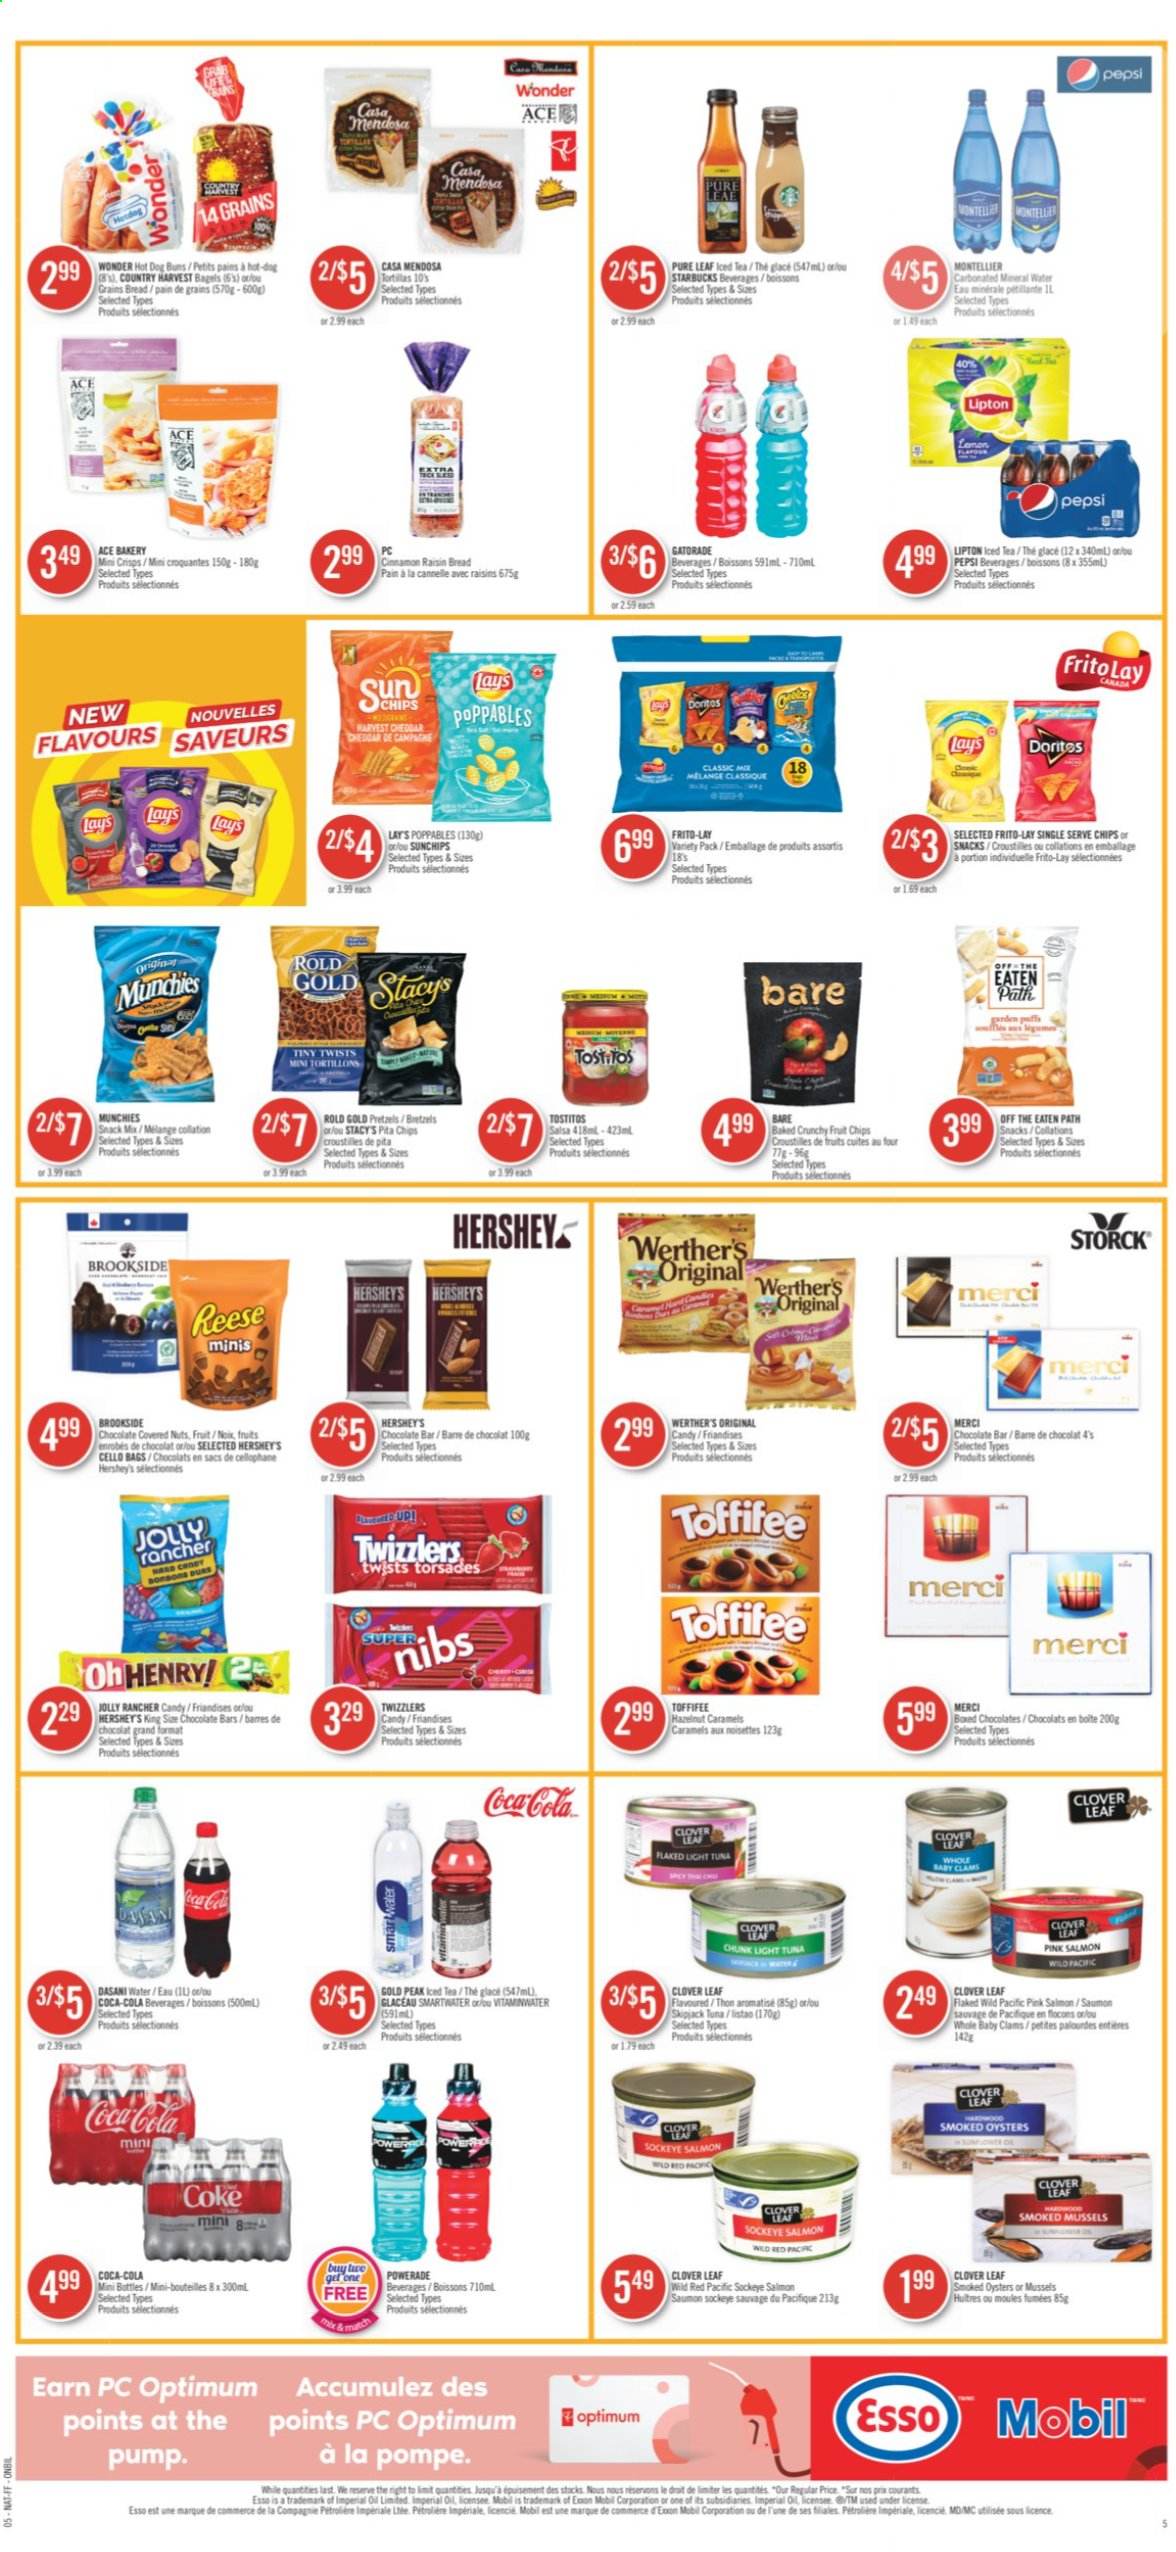 thumbnail - Shoppers Drug Mart Flyer - July 31, 2021 - August 06, 2021 - Sales products - Hershey's, Merci, chocolate bar, tortillas, Lay’s, Frito-Lay, Tostitos, ACE Bakery, pita chips, salmon, light tuna, salsa, dried fruit, Coca-Cola, Powerade, Pepsi, ice tea, Clover, Gatorade, mineral water, Smartwater, Pure Leaf, Starbucks, raisins, tuna, chips. Page 9.